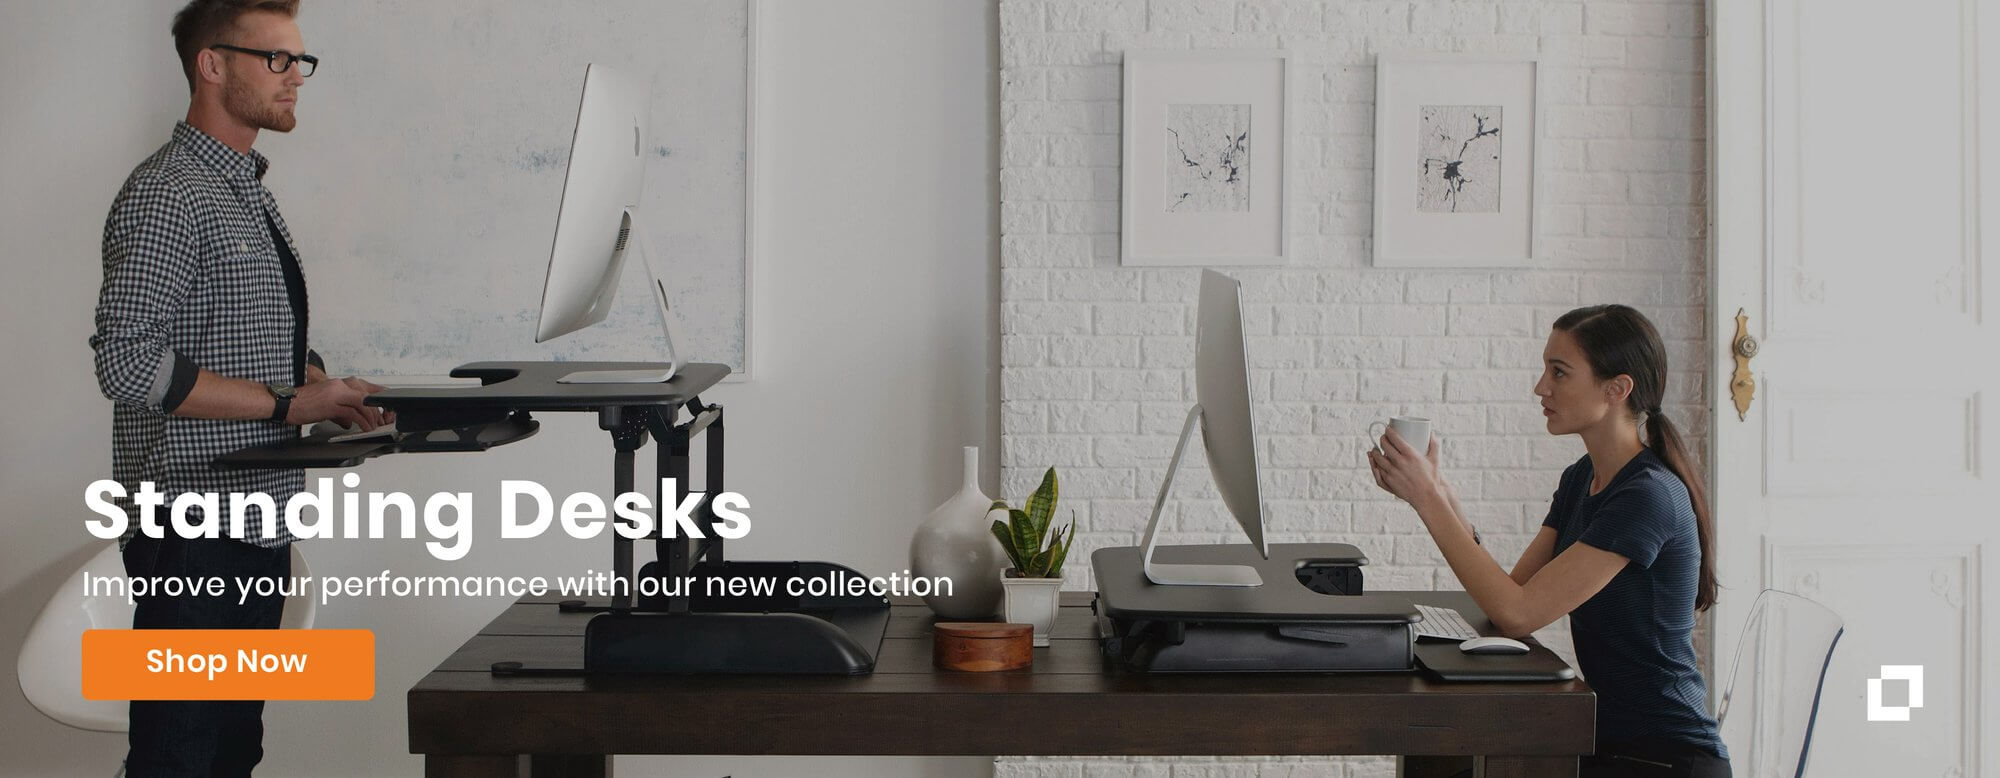 standing desks to improve your performance, click here to see the new collections